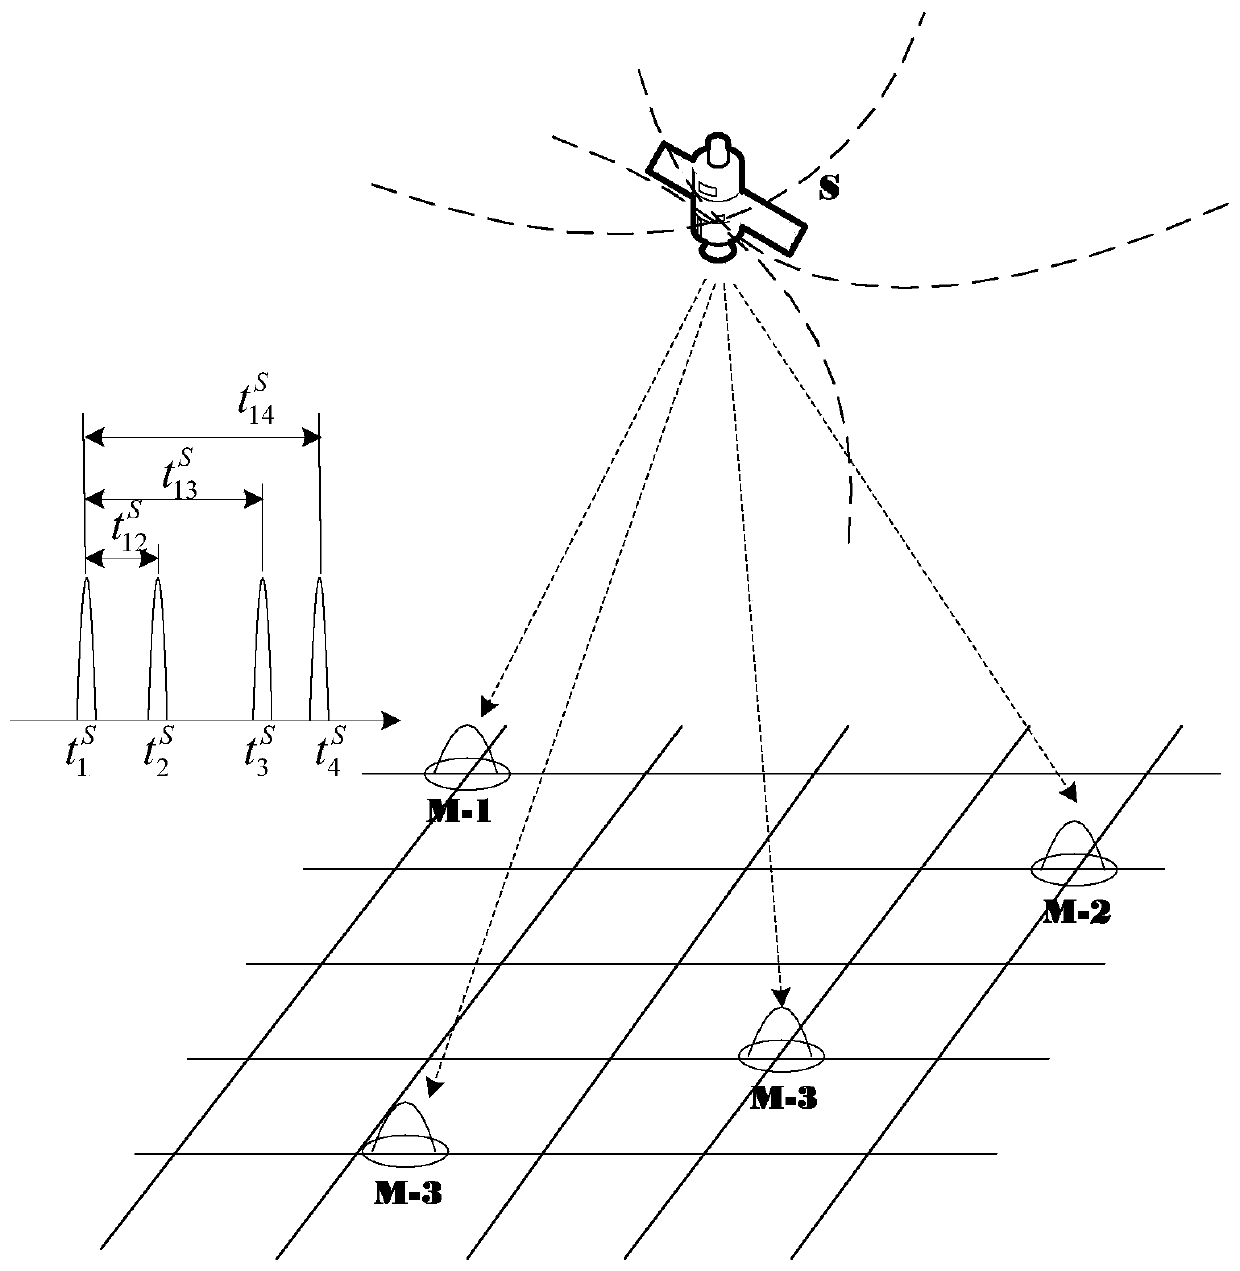 A Localization Method Based on Time-Space Distribution of Signal Delay Characteristics